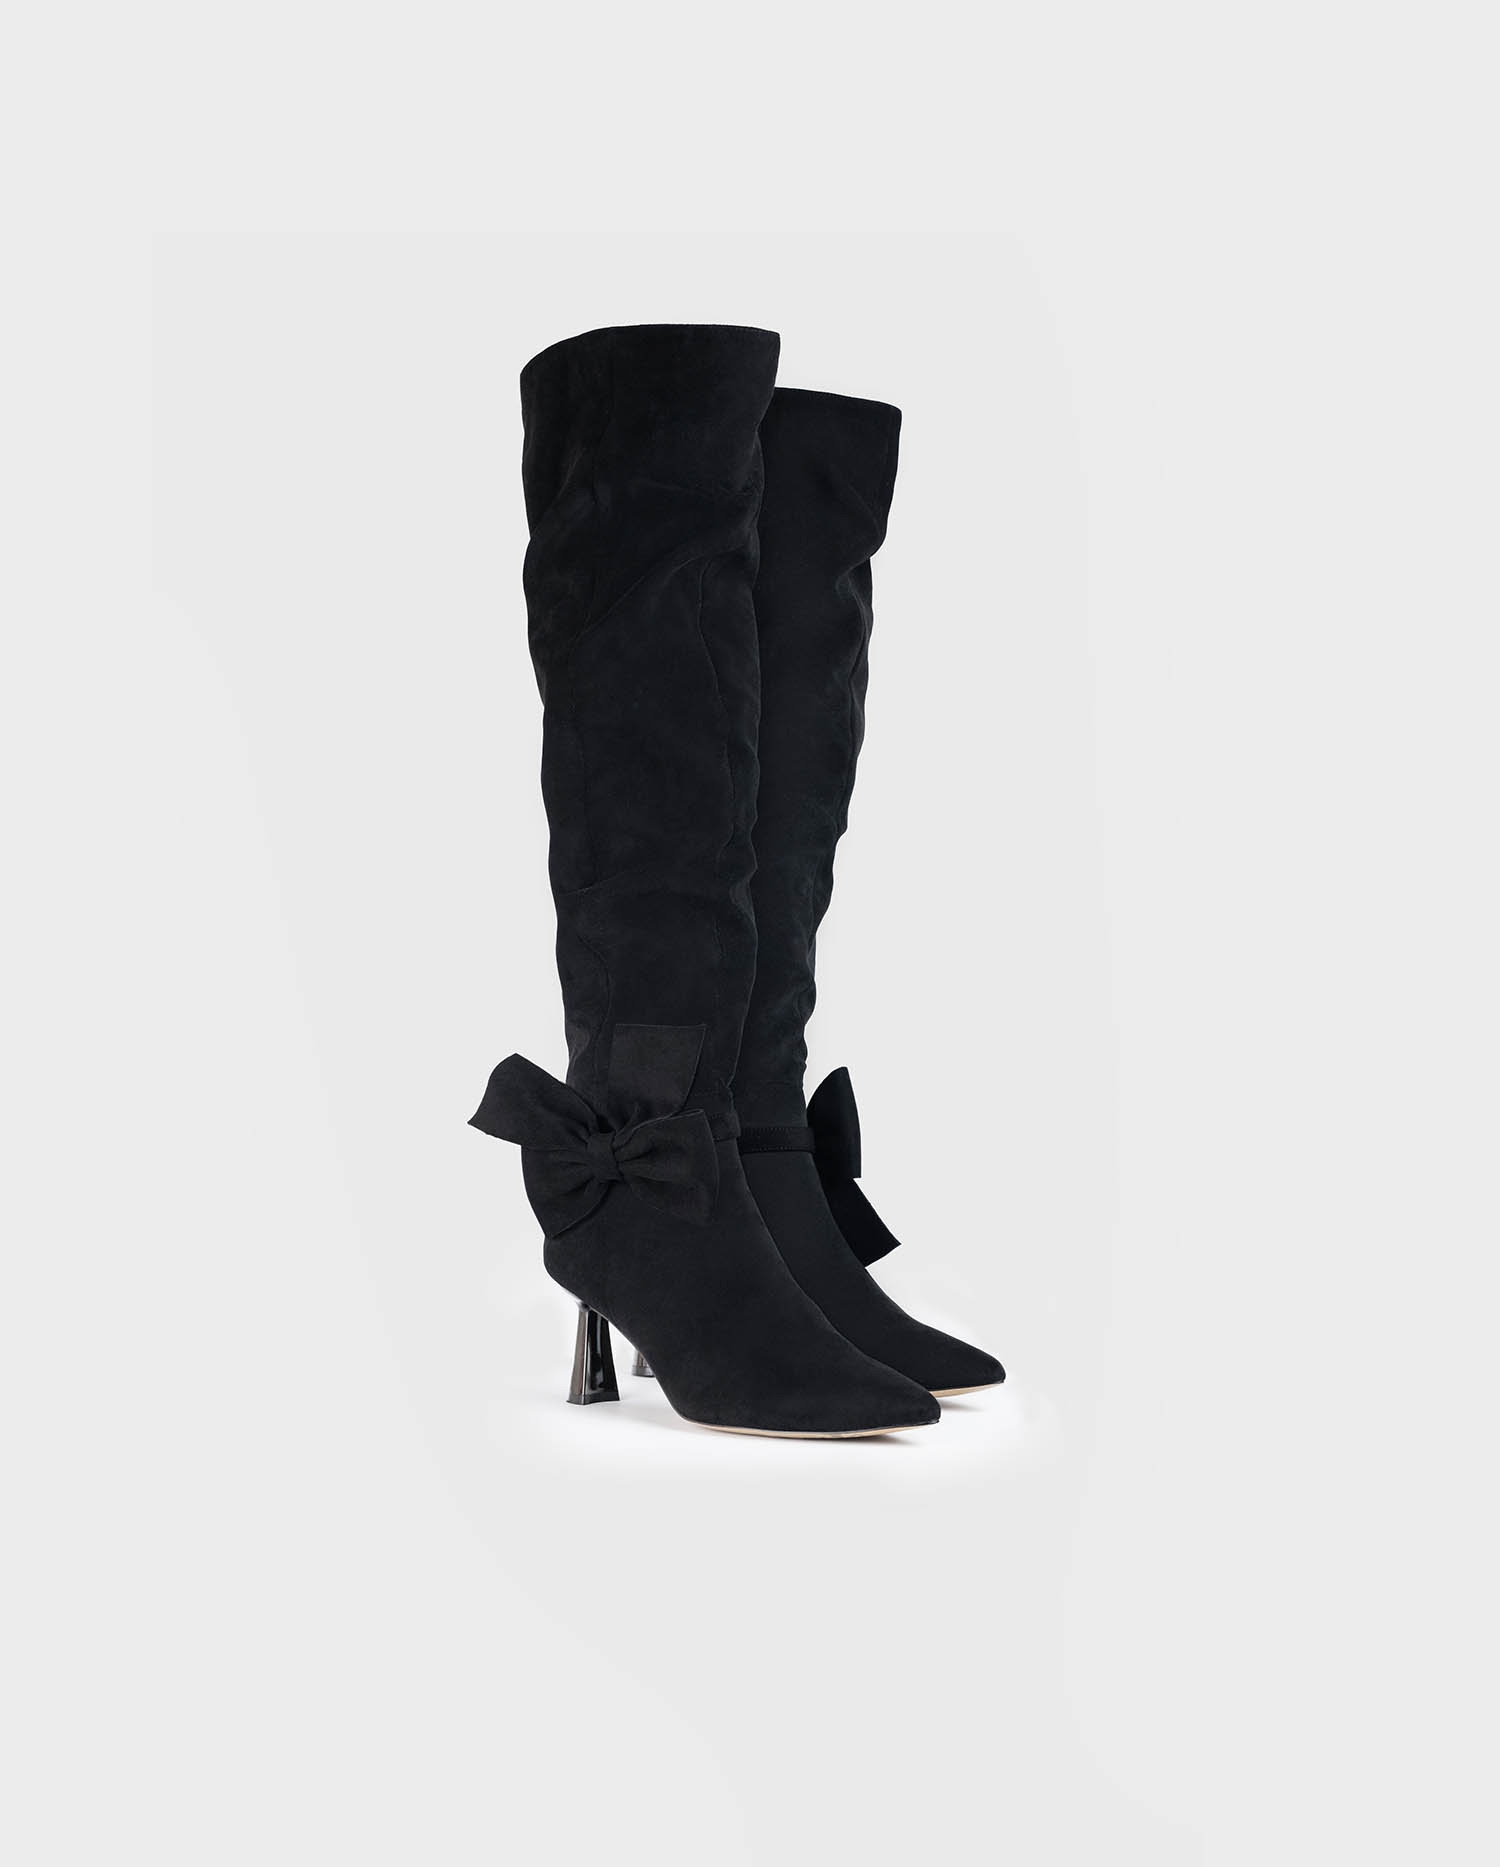 Shop the Black Preface Suede Knee High Boots With Removable Bow from designer Anne Fontaine